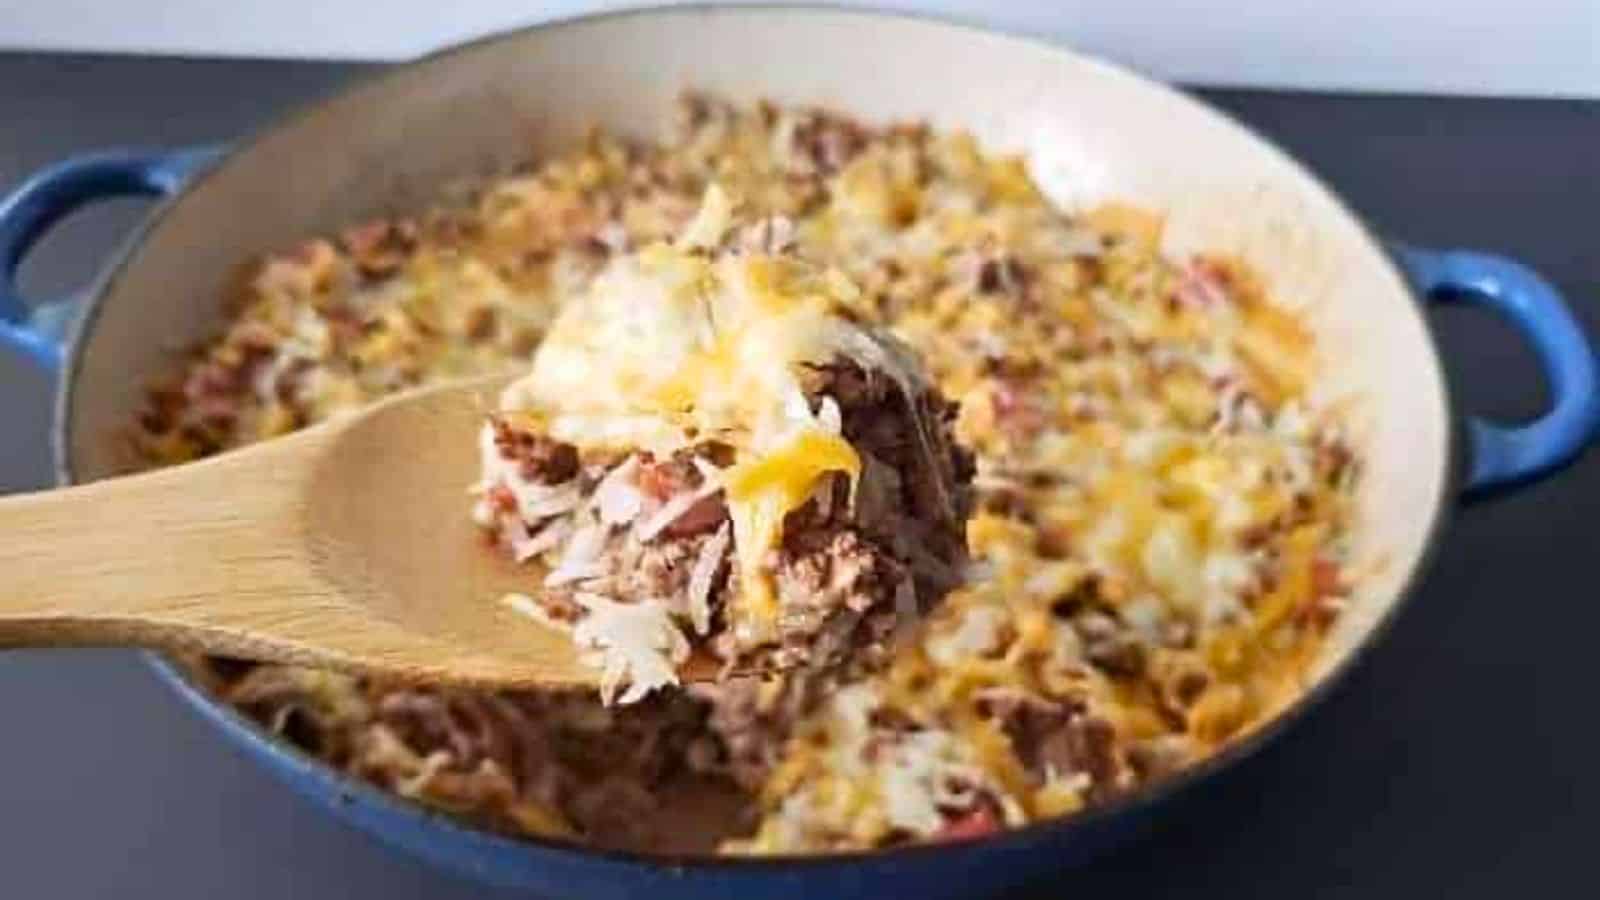 Image shows a closeup of a spoon holding some Cheesy Beef and Rice Casserole with the full skillet behind it.